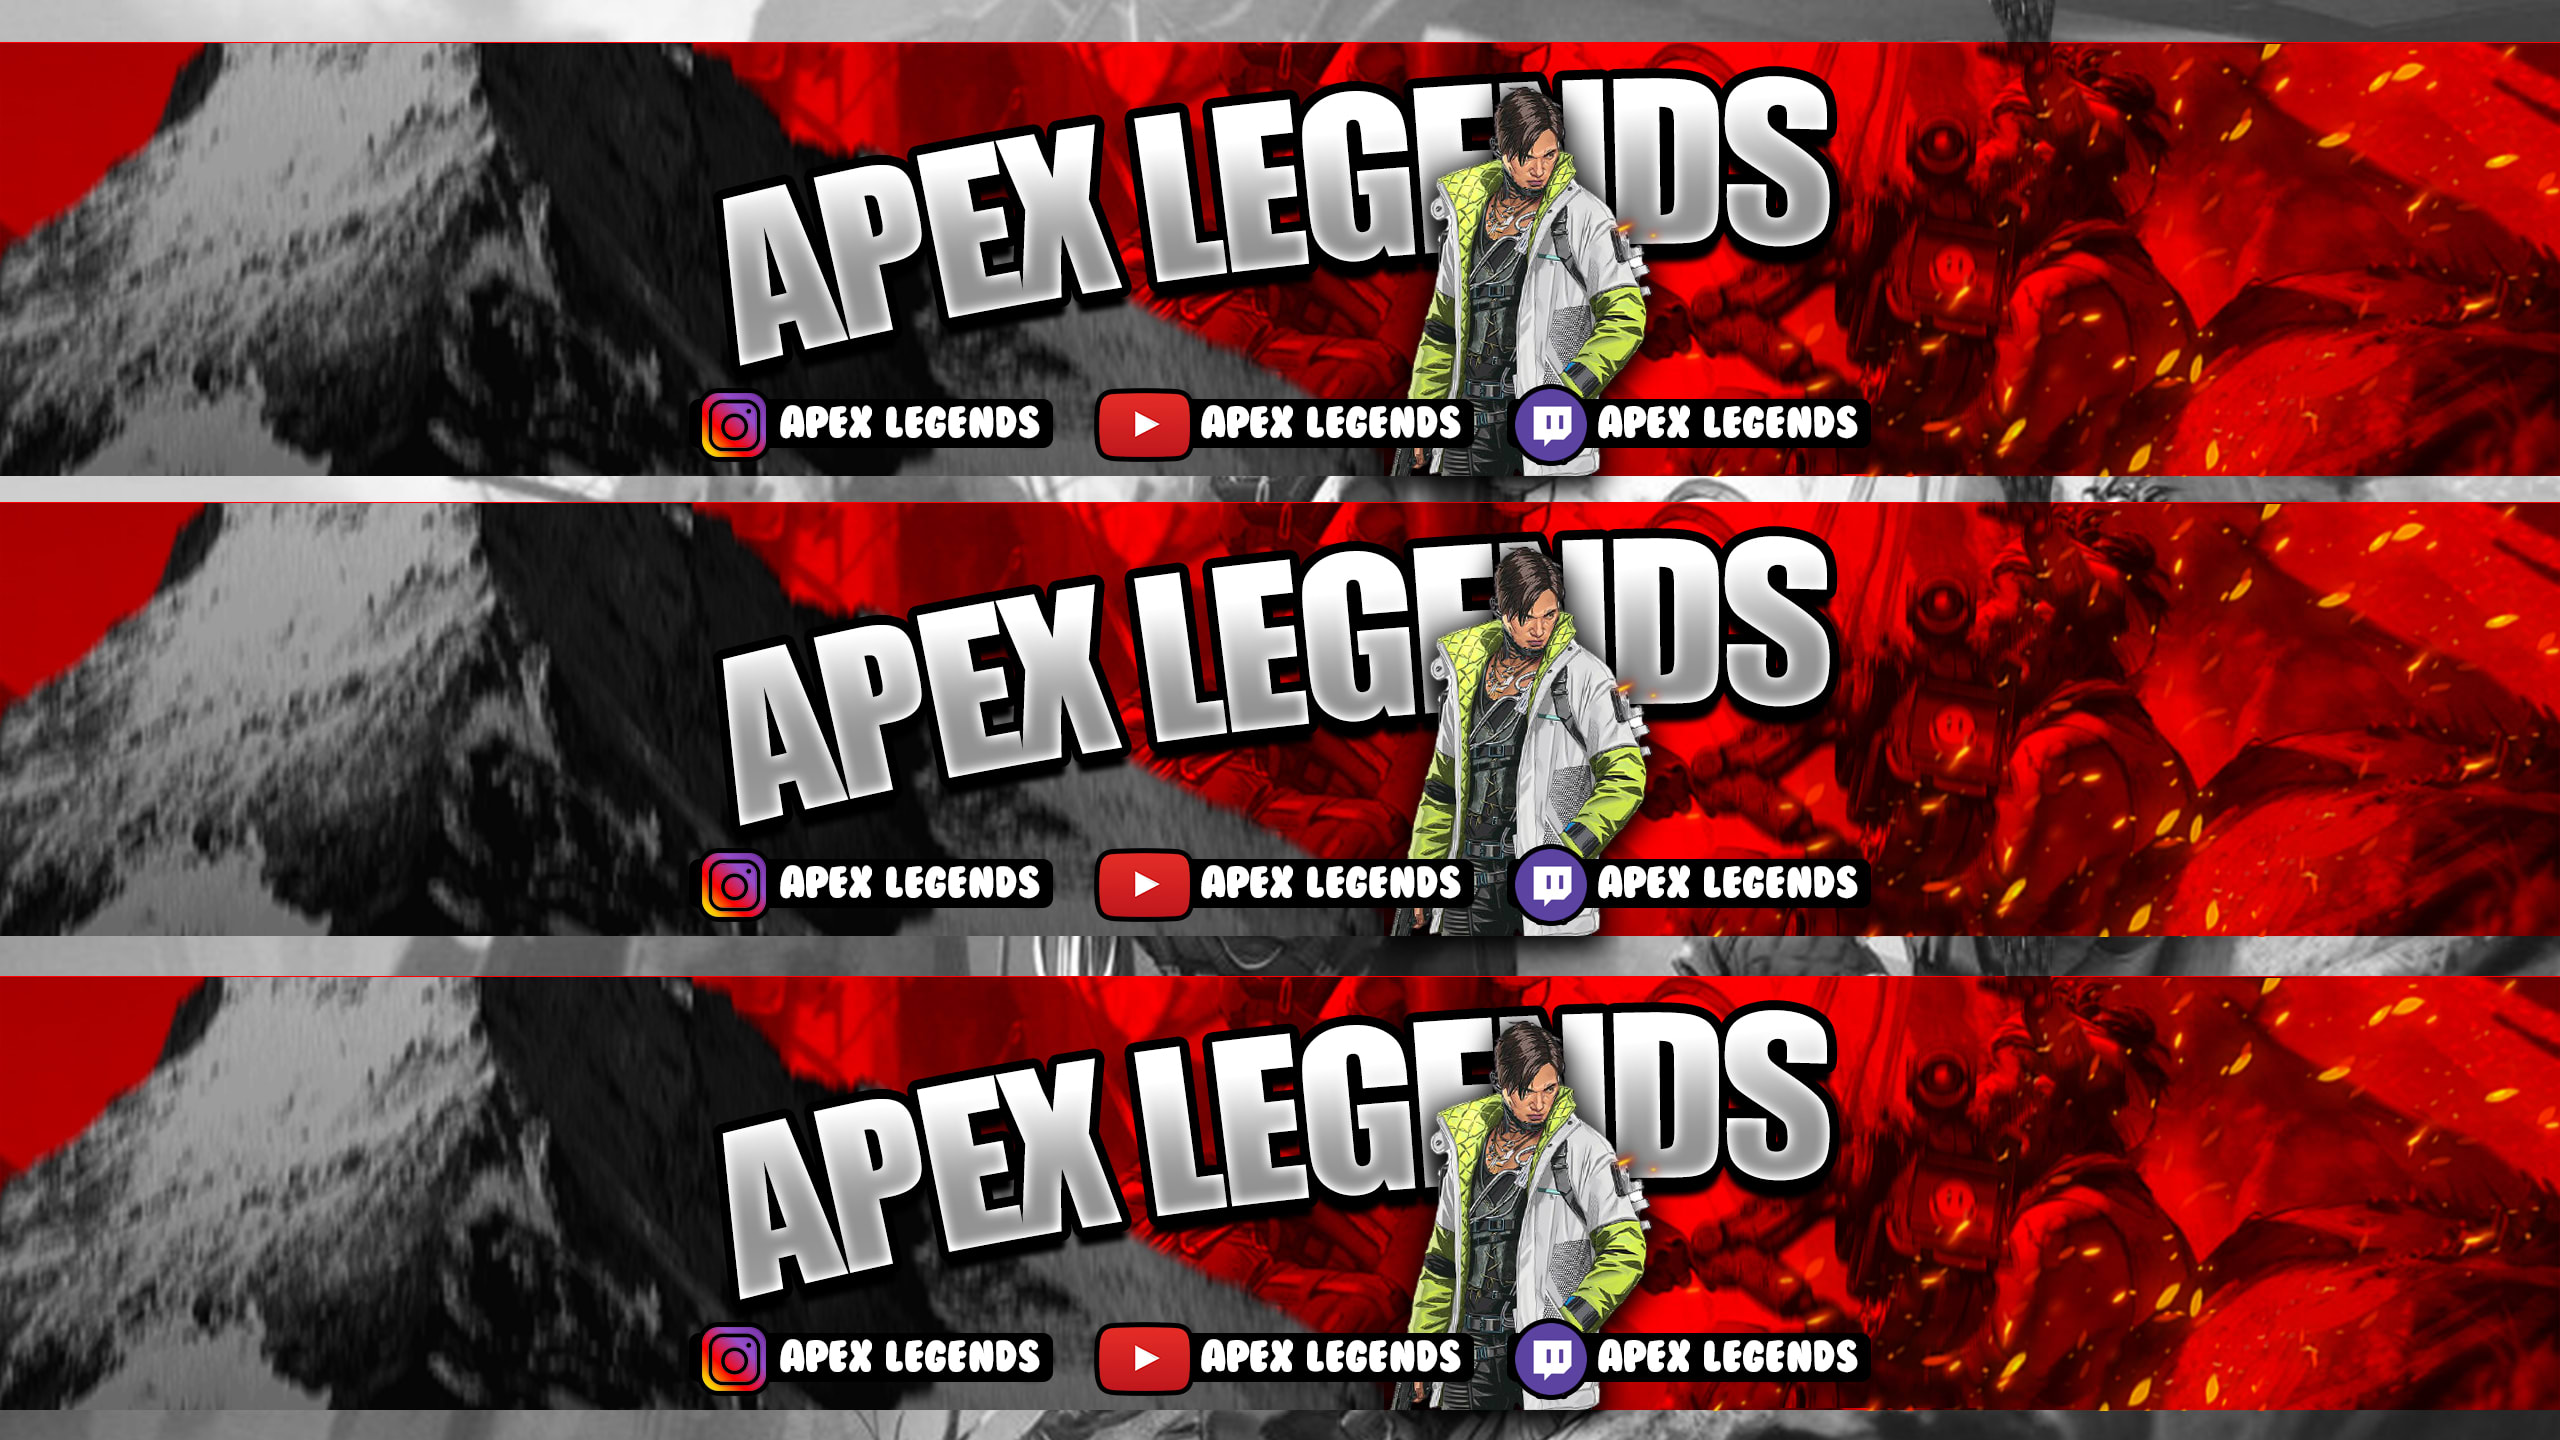 Make Banner Youtube Gaming Apex Legends With Photoshop By Baynotbazzy Fiverr